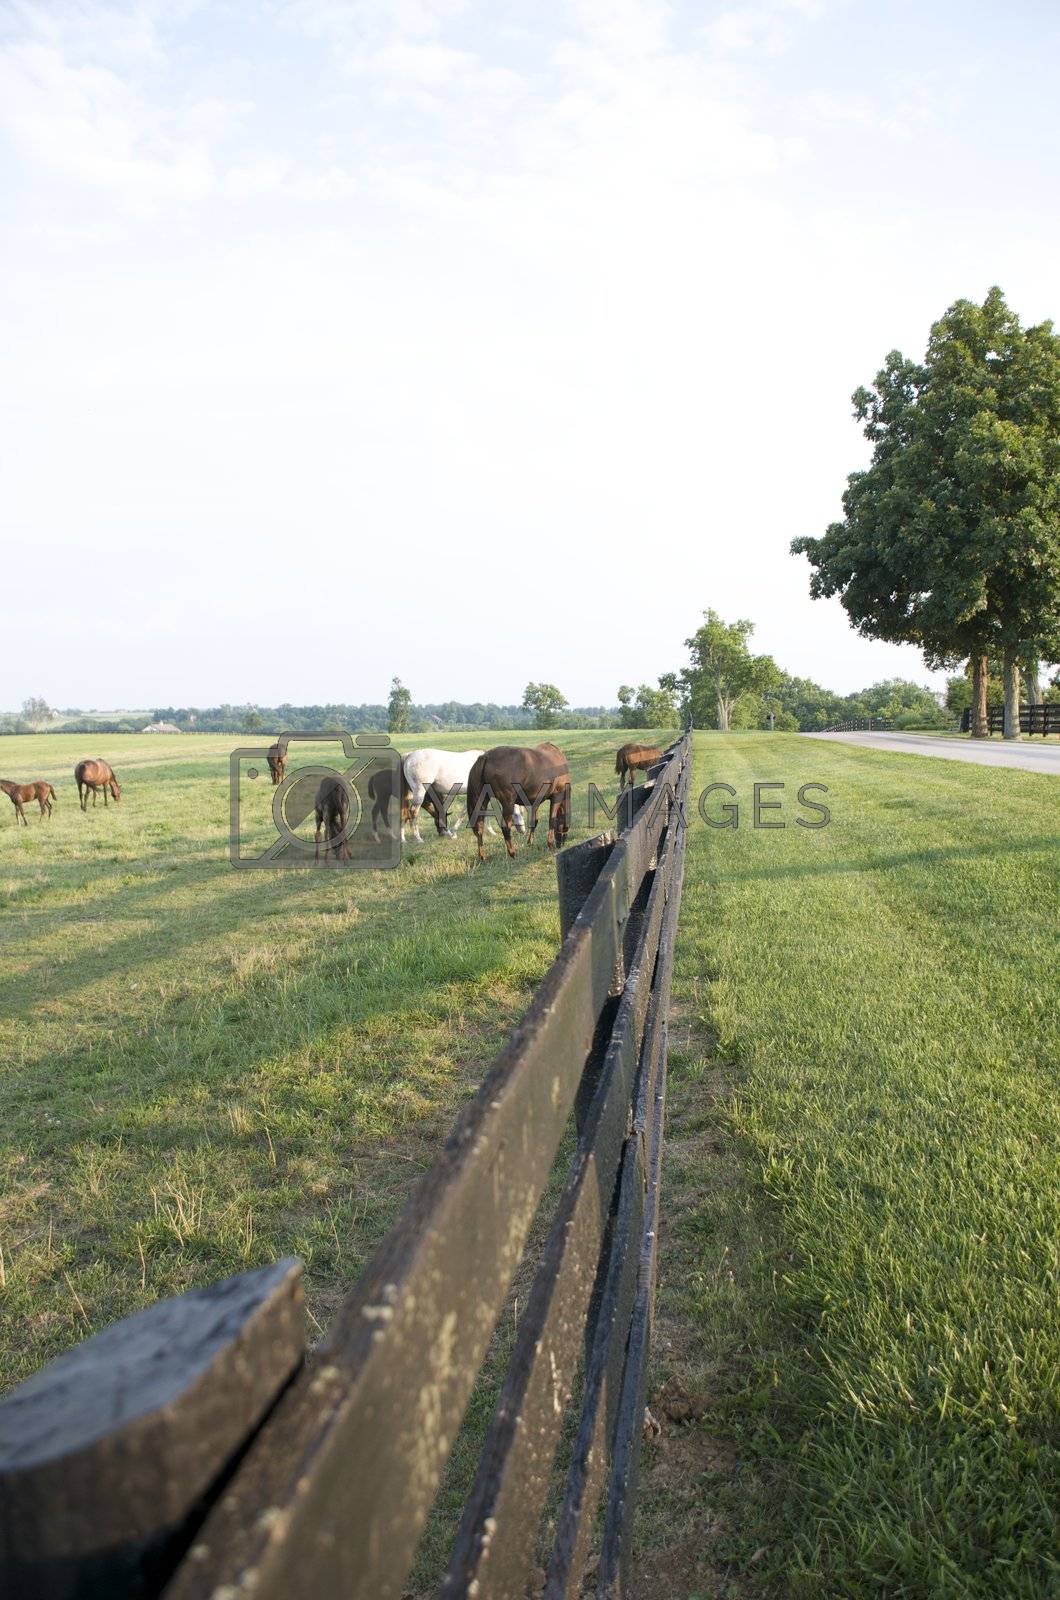 Royalty free image of Kentucky Thoroughbreds by jedphoto